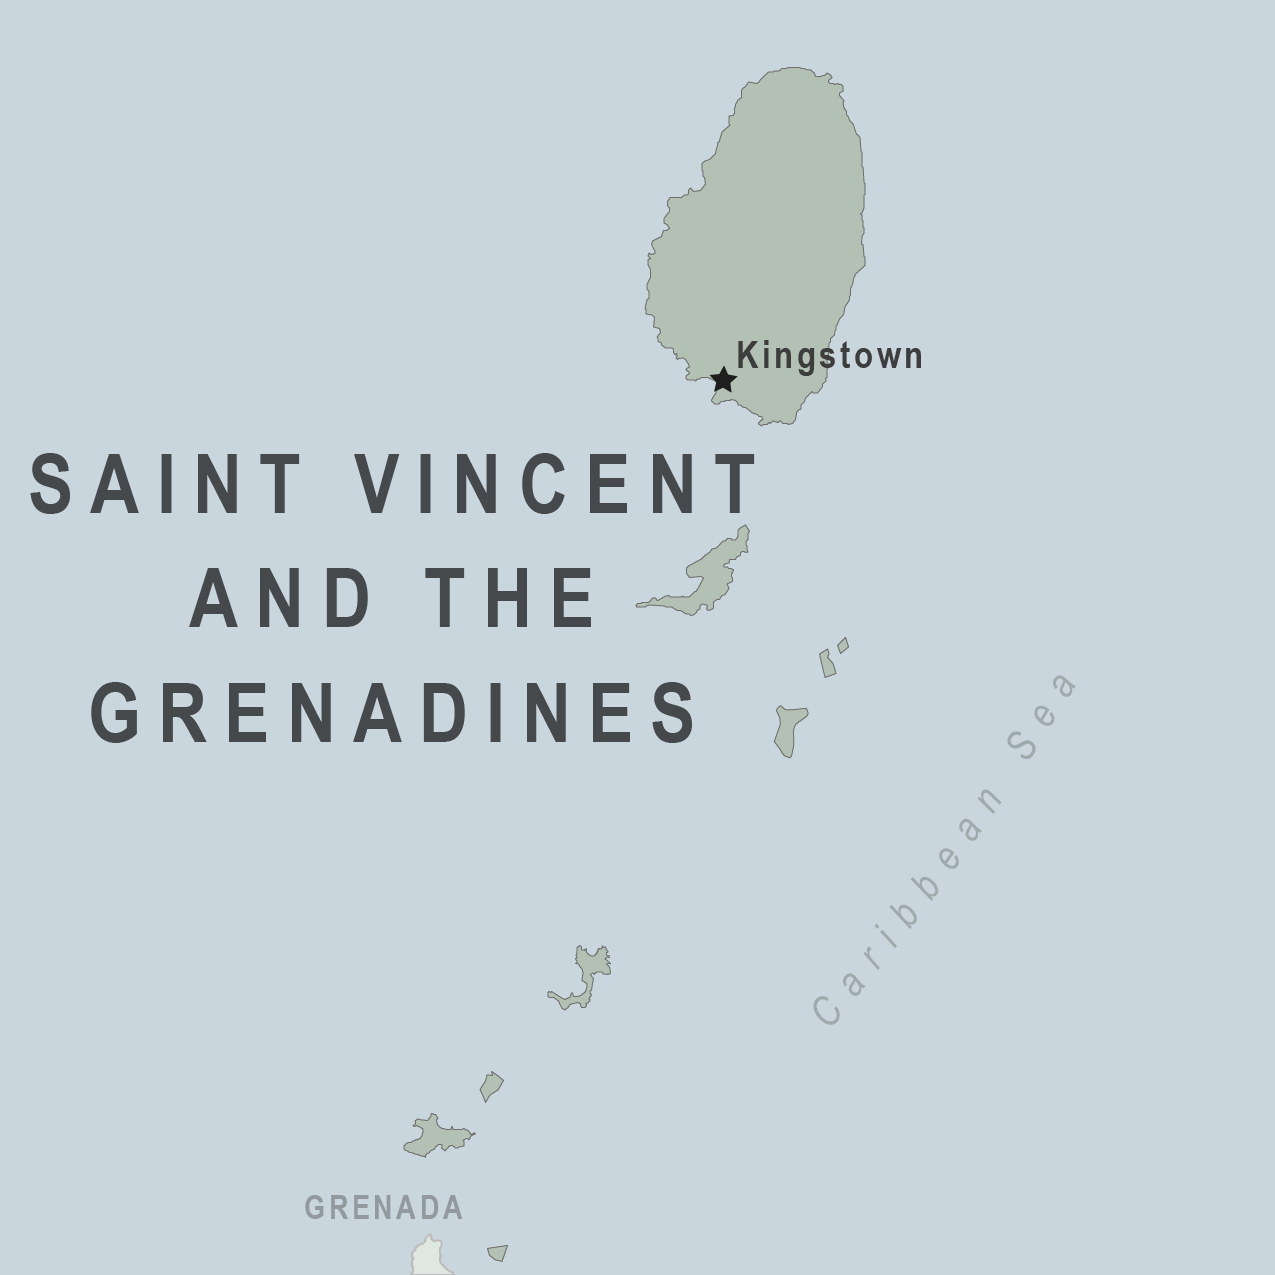 Map - Saint Vincent and the Grenadines